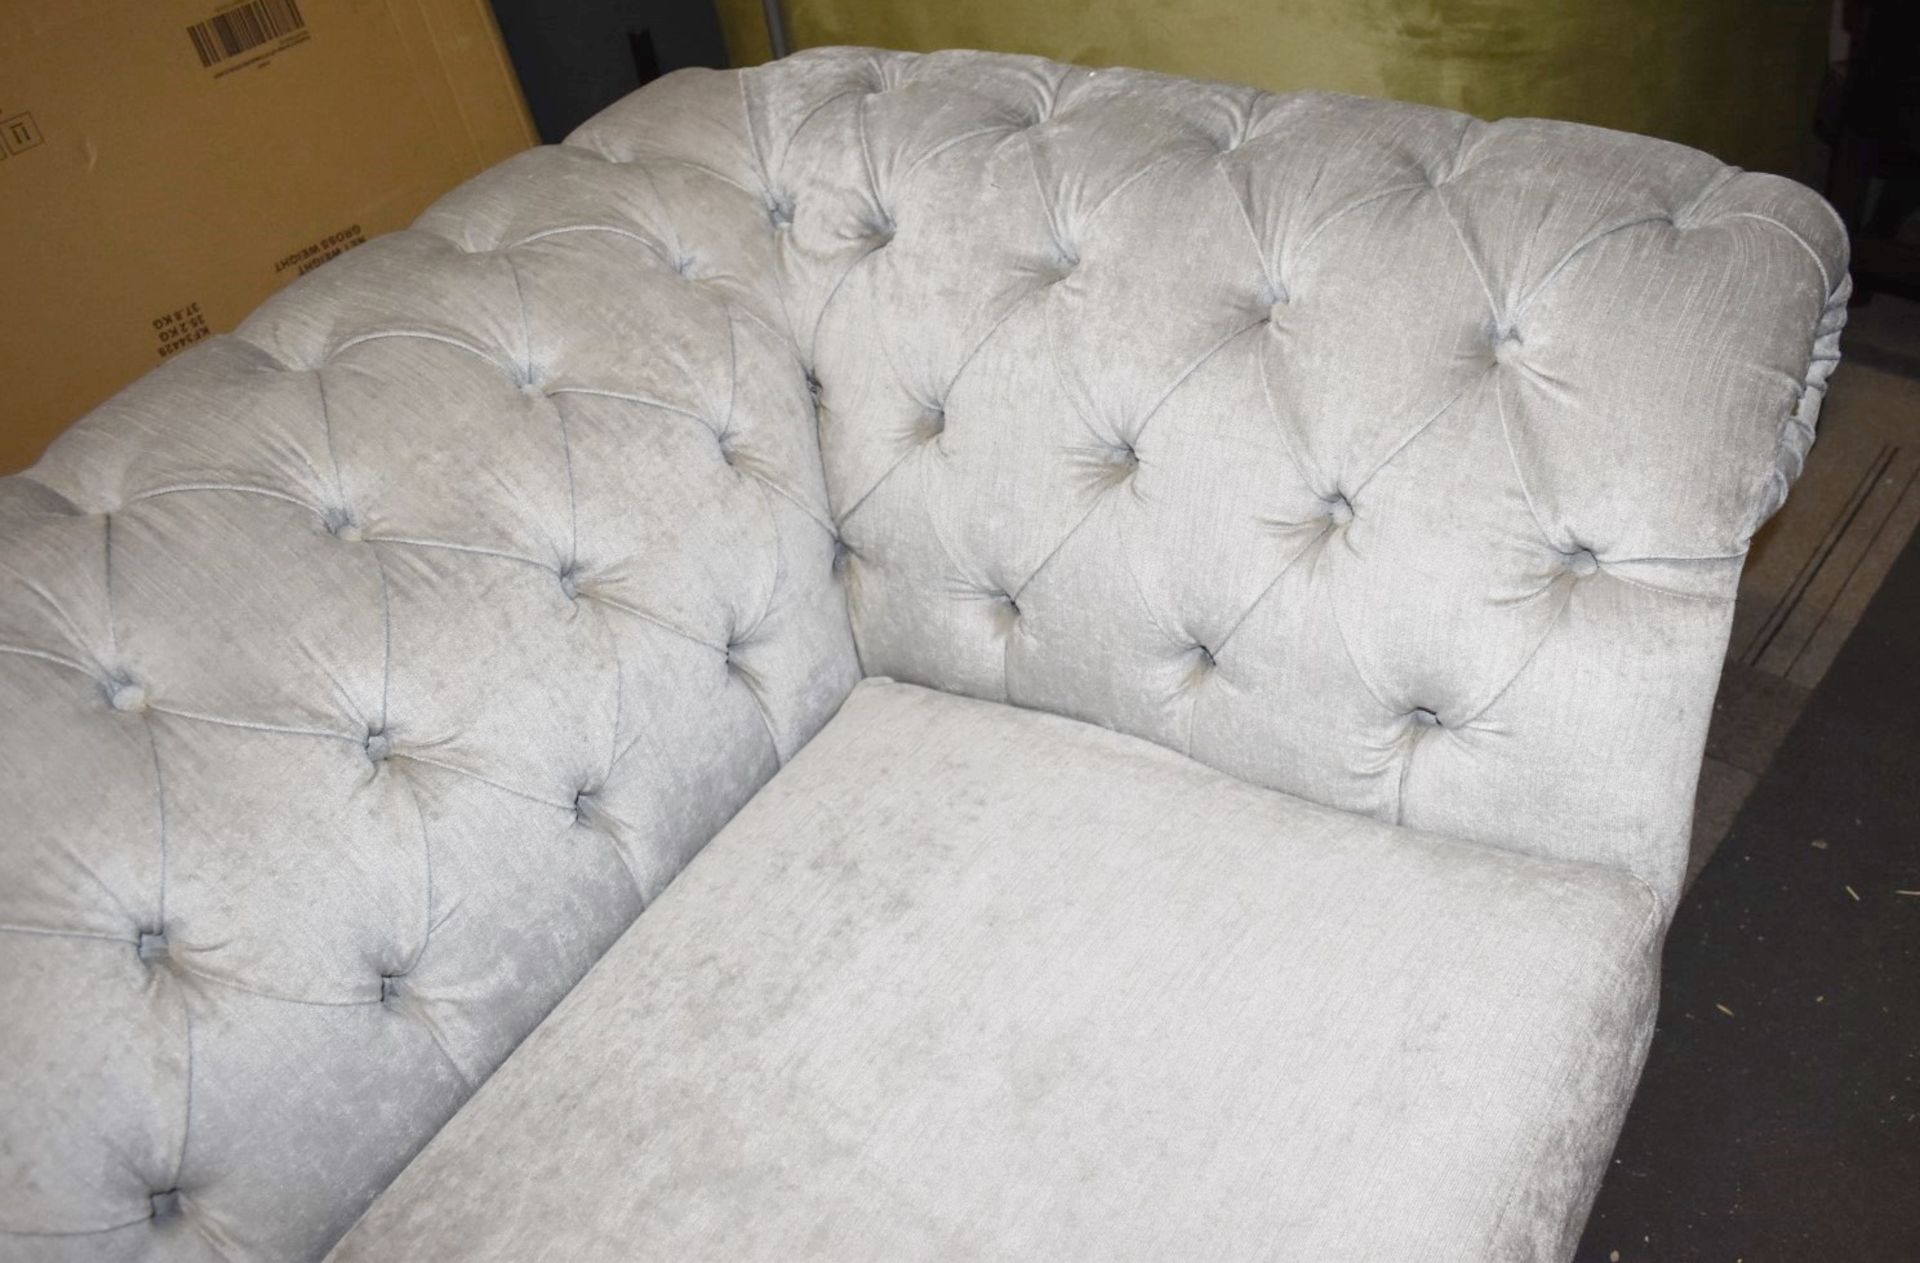 1 x Chesterfield-style Velvet Upholstered Sofa, on Castors, 2.2-Metres Wide  - Luxury Furniture - Image 4 of 14